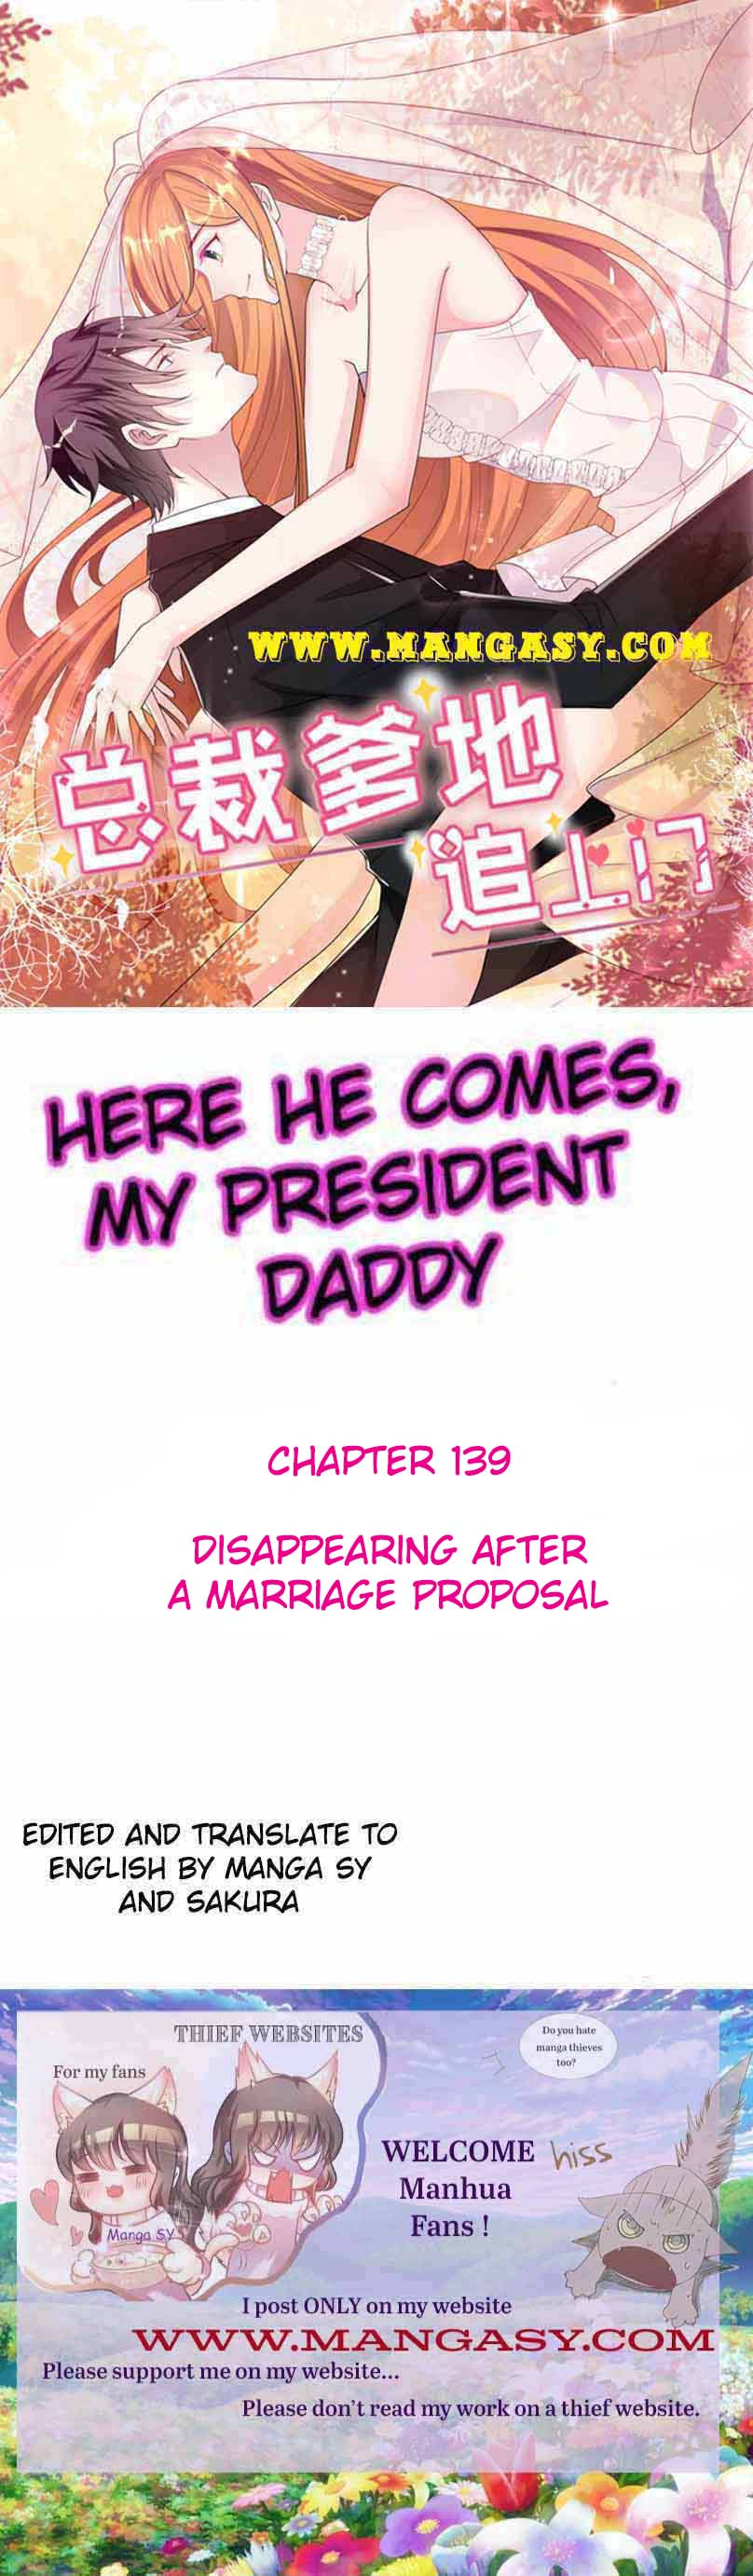 President Daddy Is Chasing You - Page 1